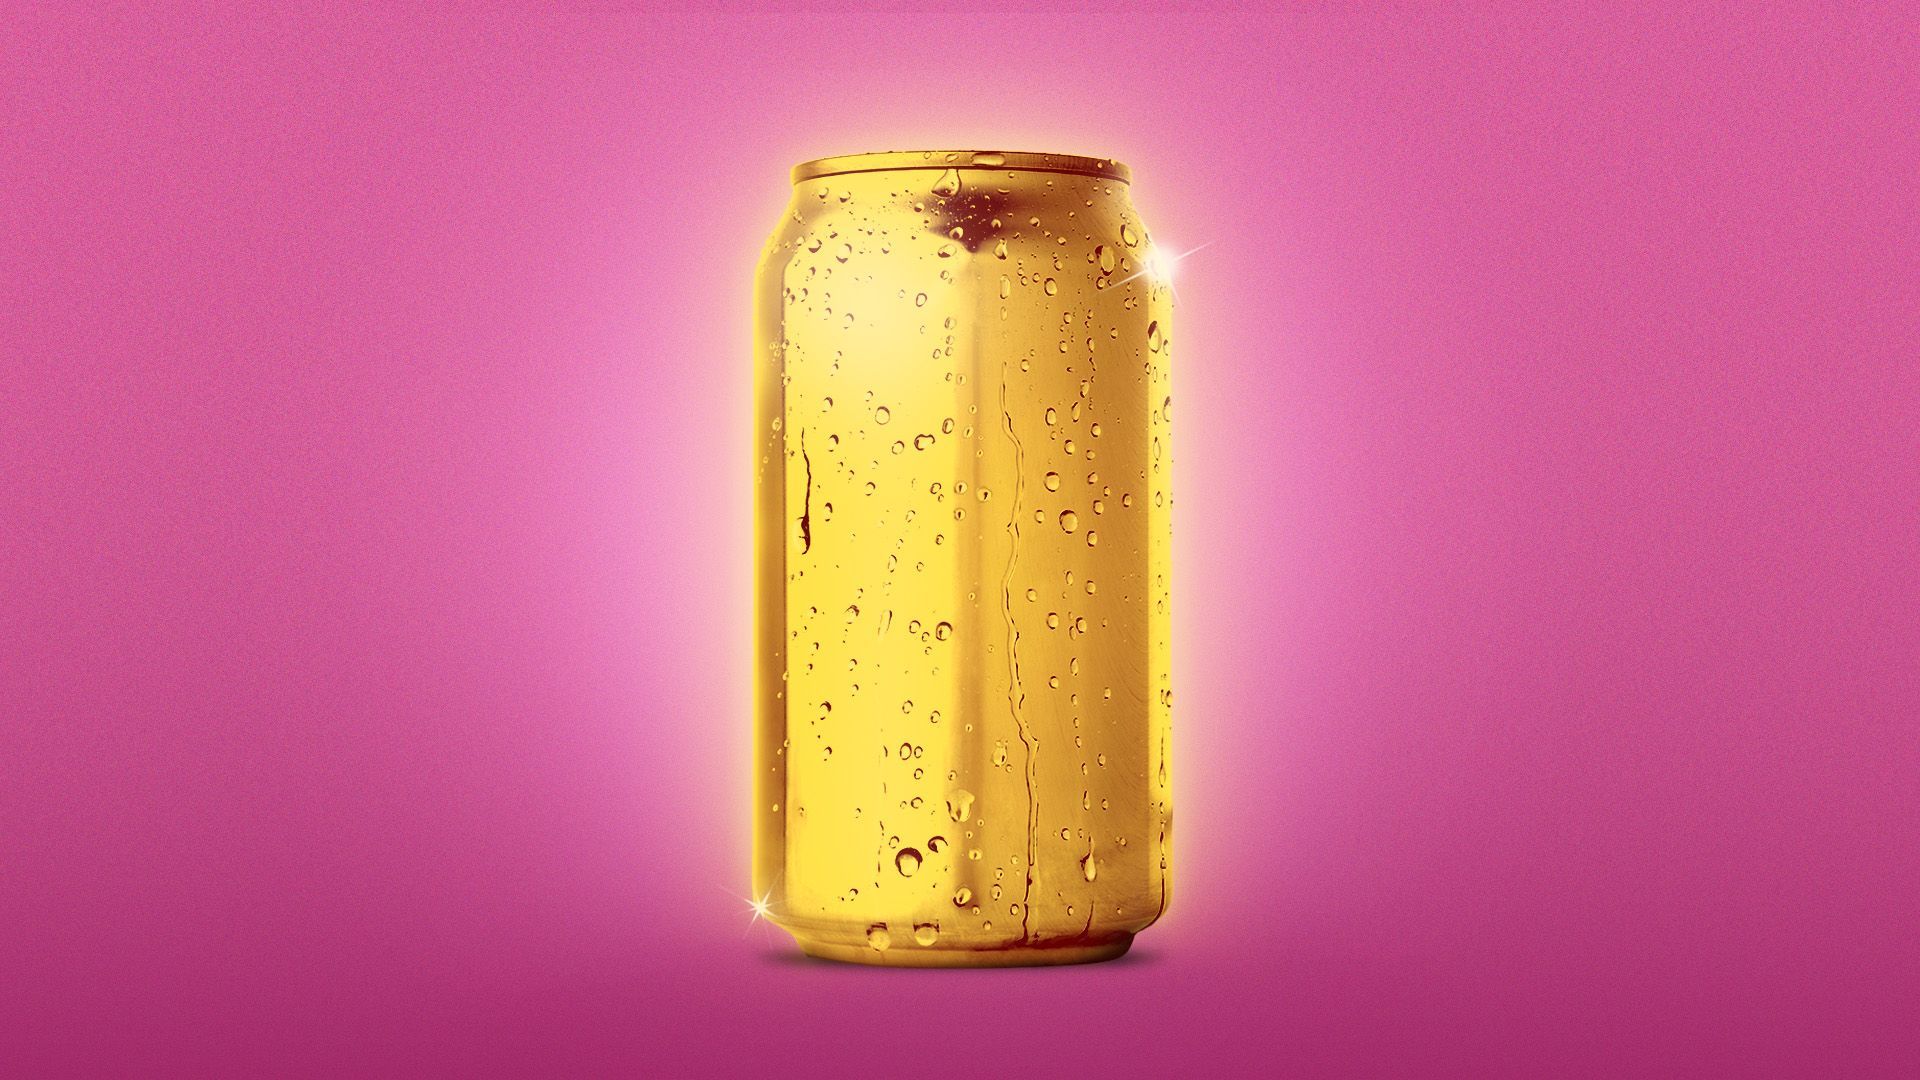 an illustration of a glowing gold drink can on a hot pink background 